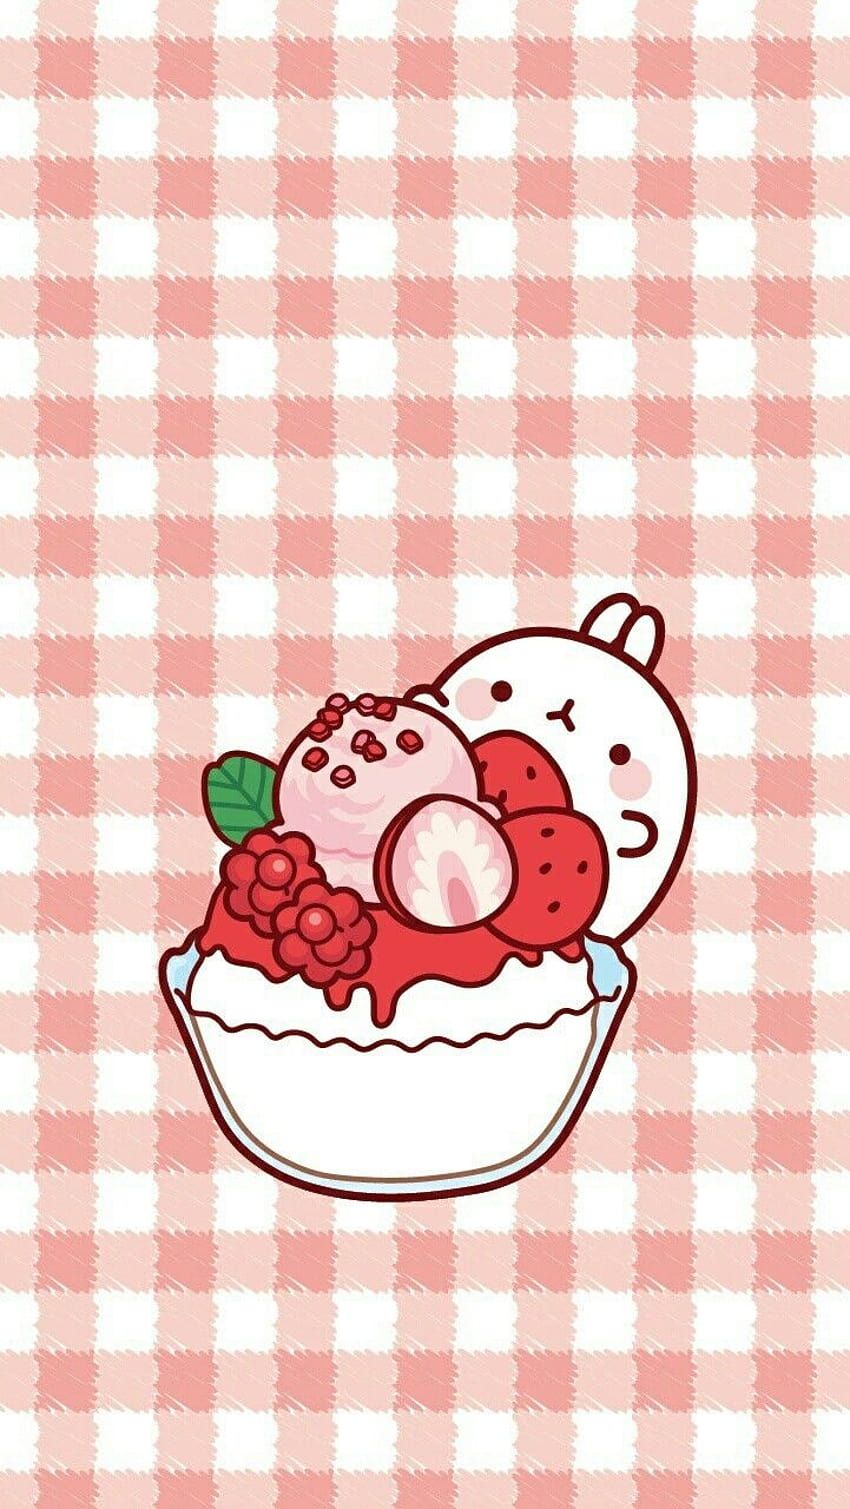 A cute cartoon bear is eating ice cream on pink and white checkered background - Molang